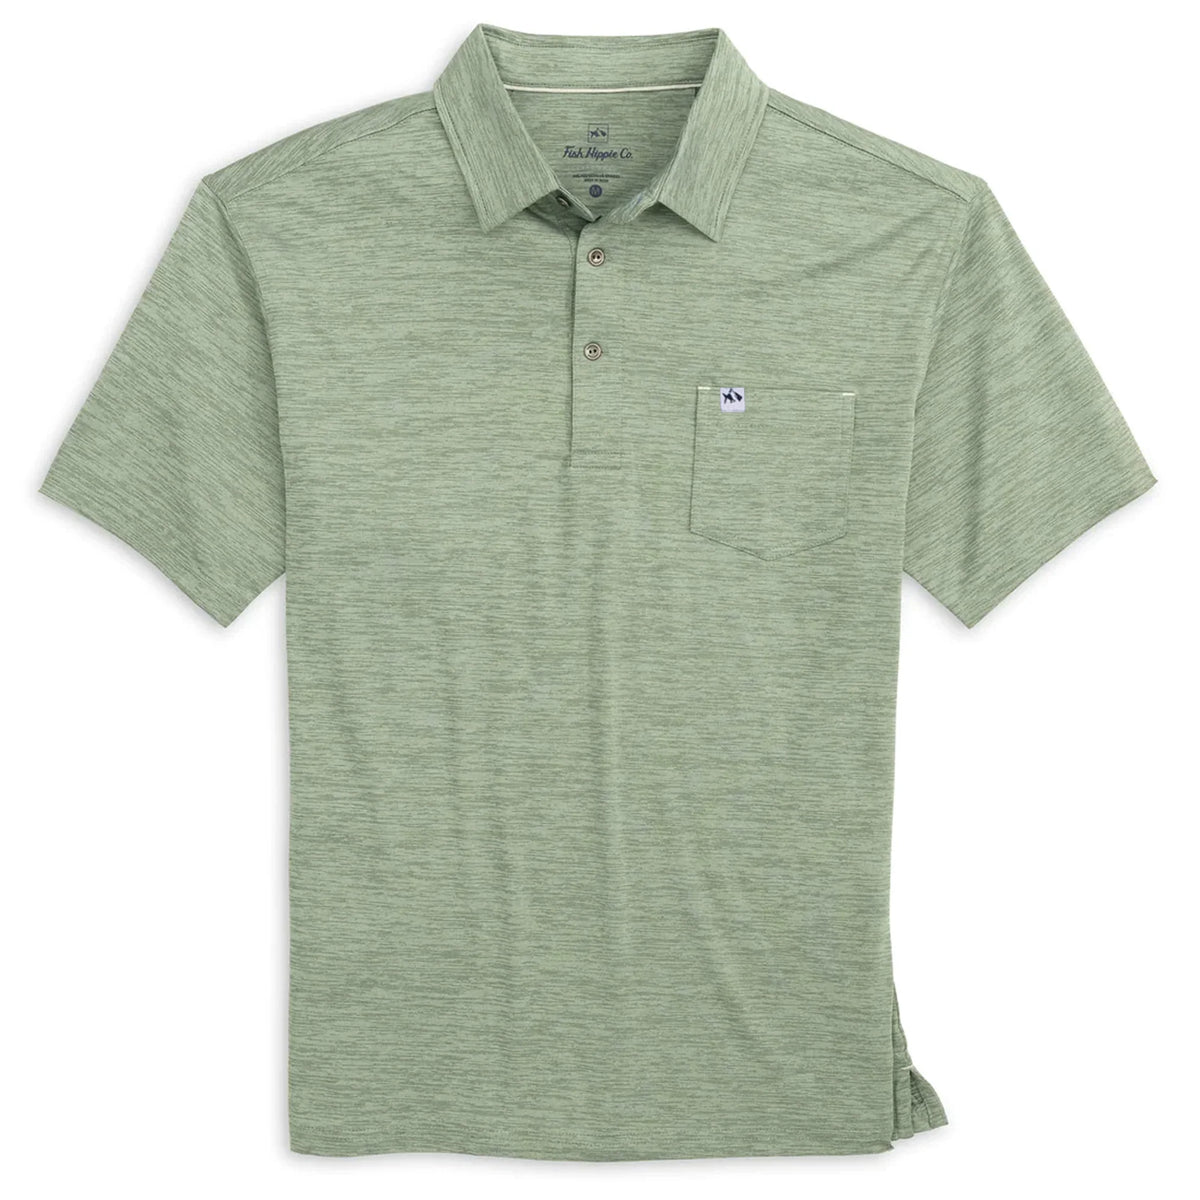 Boden Heather Performance Polo - KC Outfitter